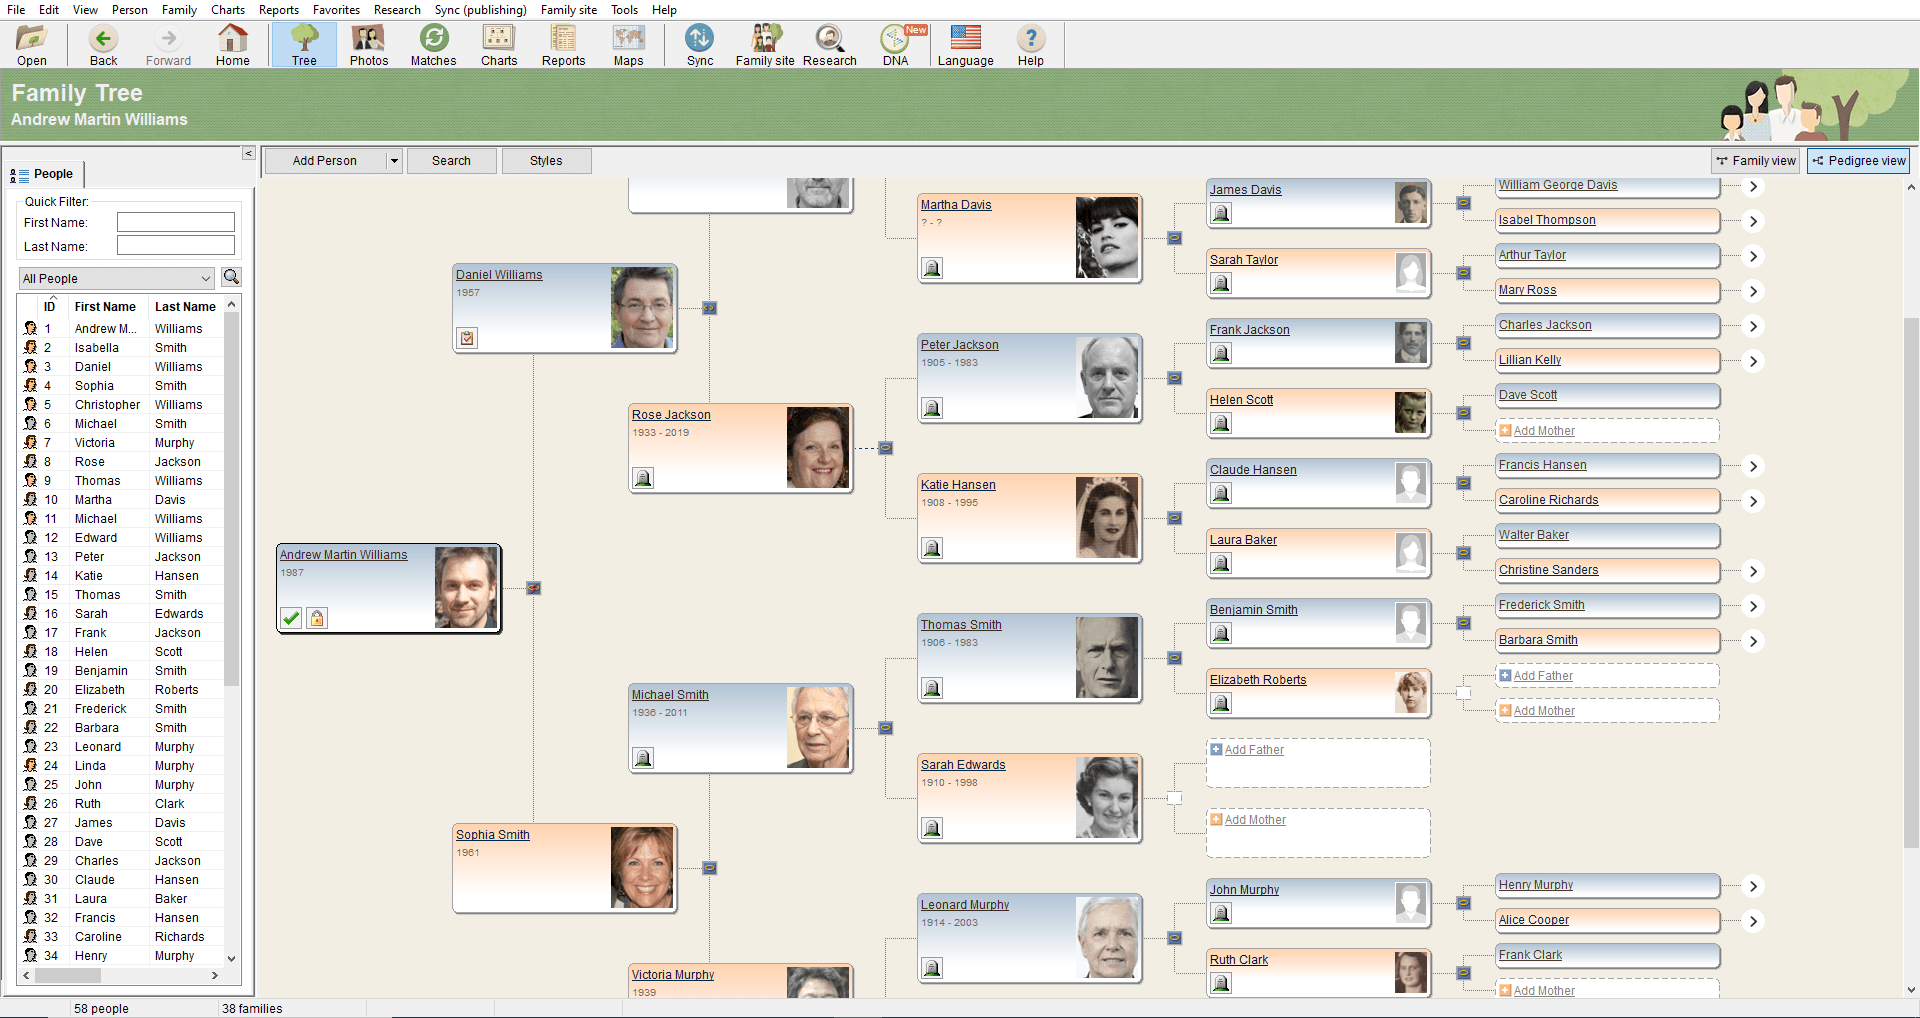 Family tree in Pedigree View mode